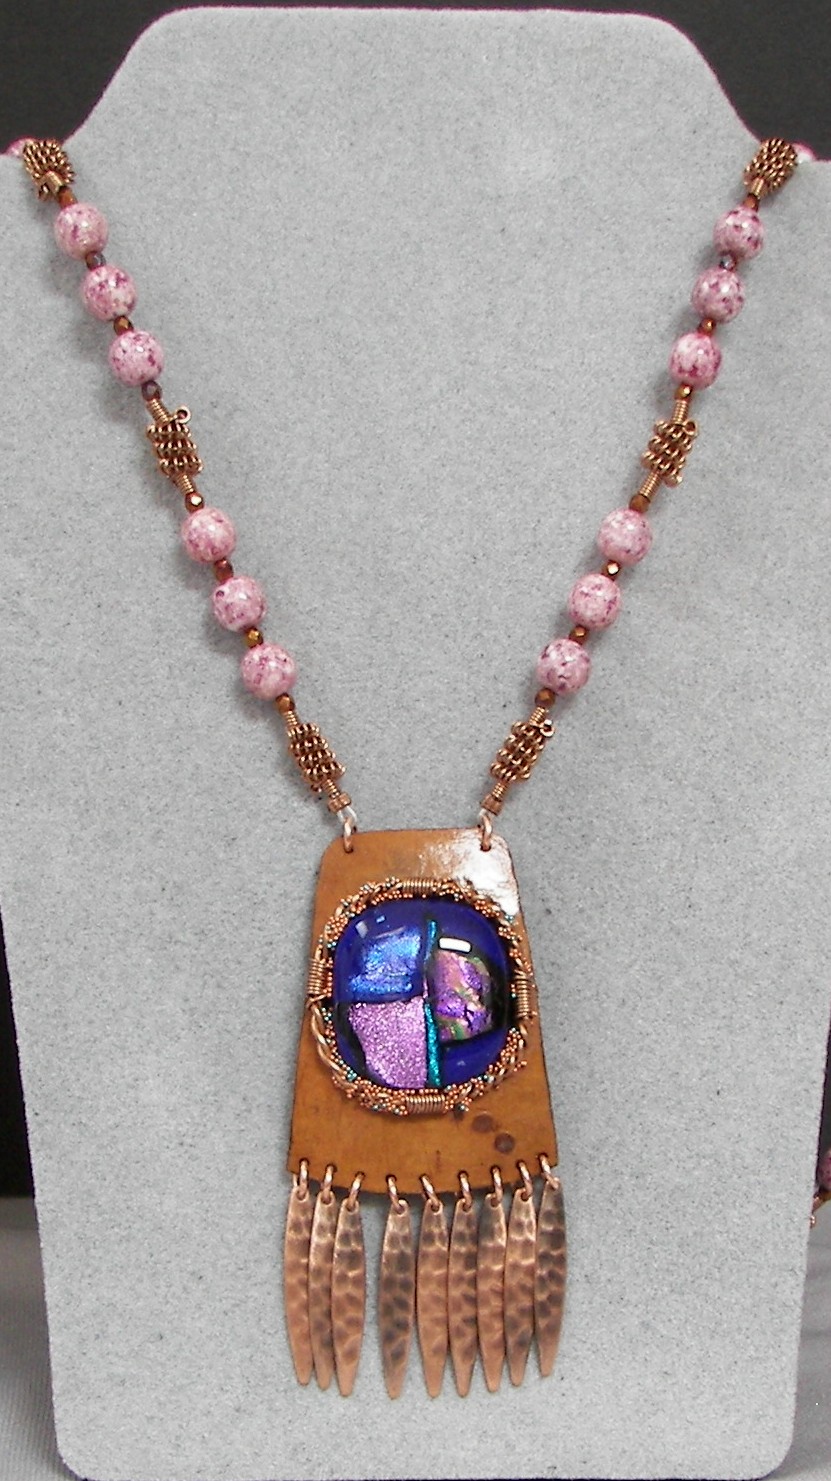 gourd-jewelry-pink-blue-and-copper-may-2012